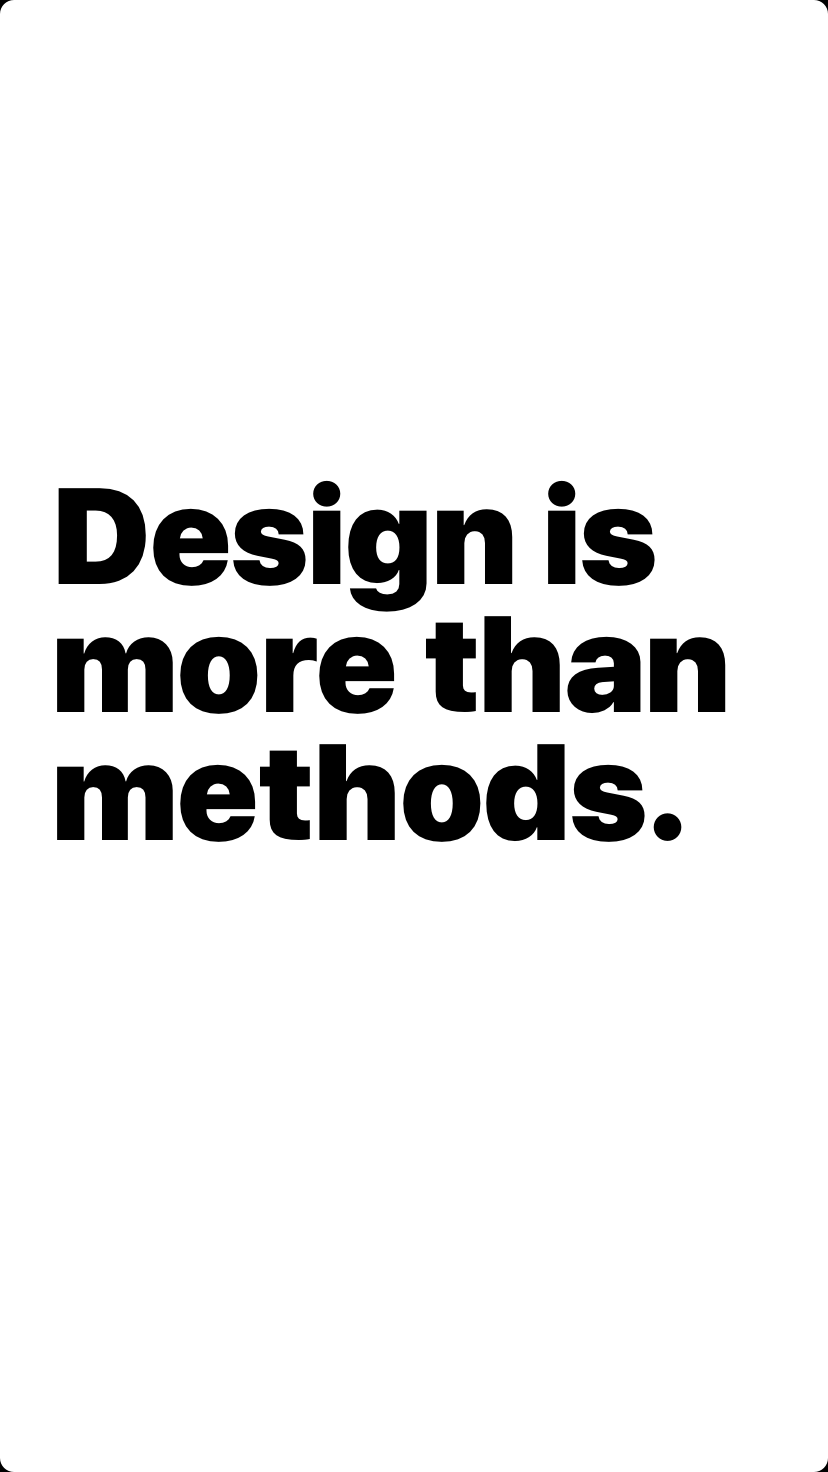 Design is more than methods.